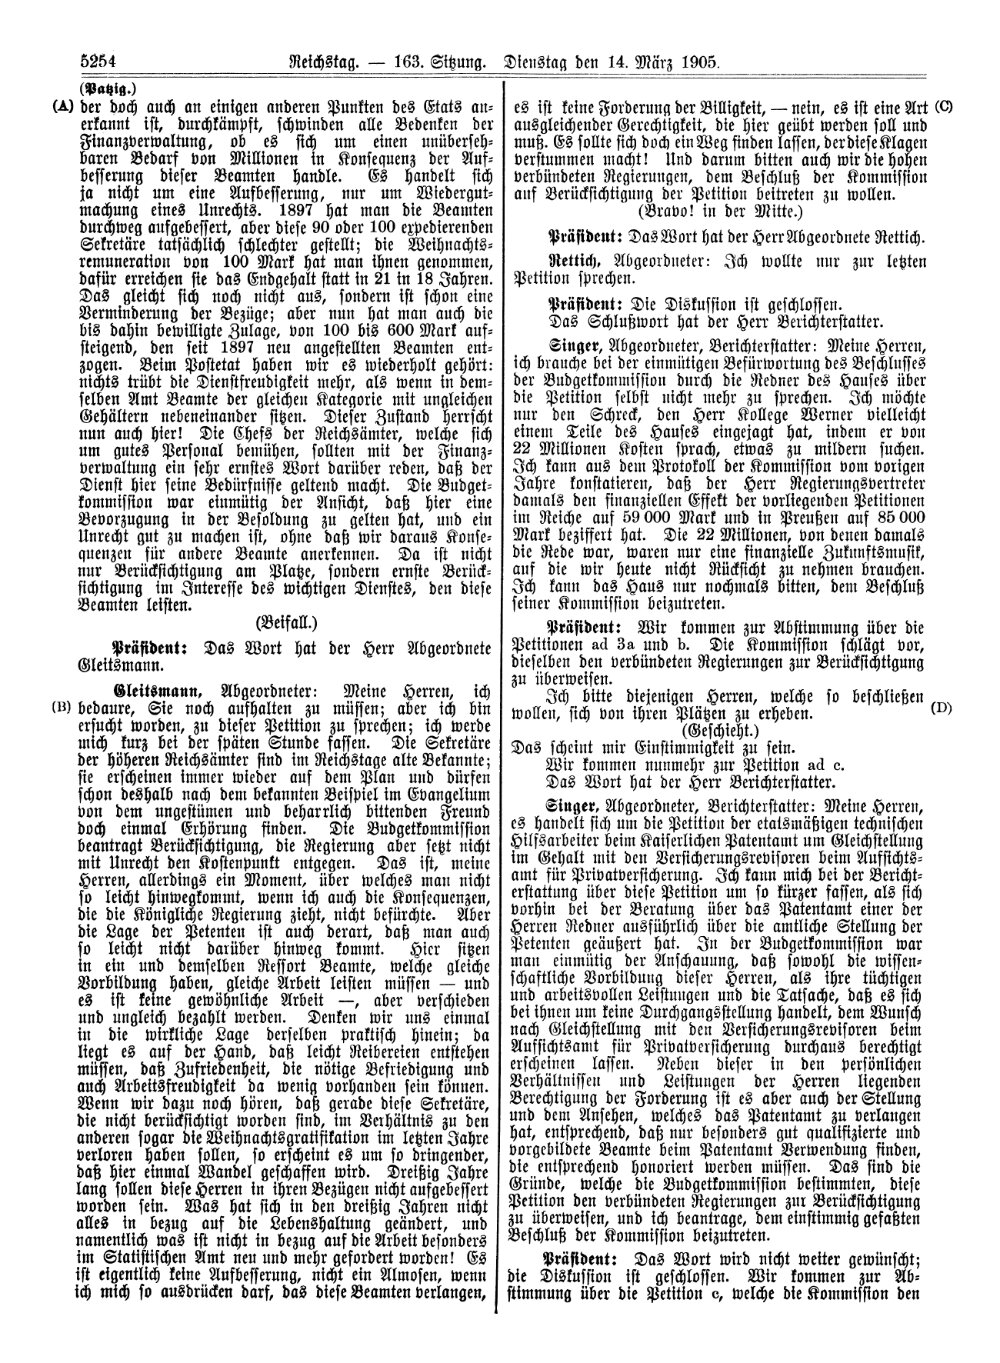 Scan of page 5254